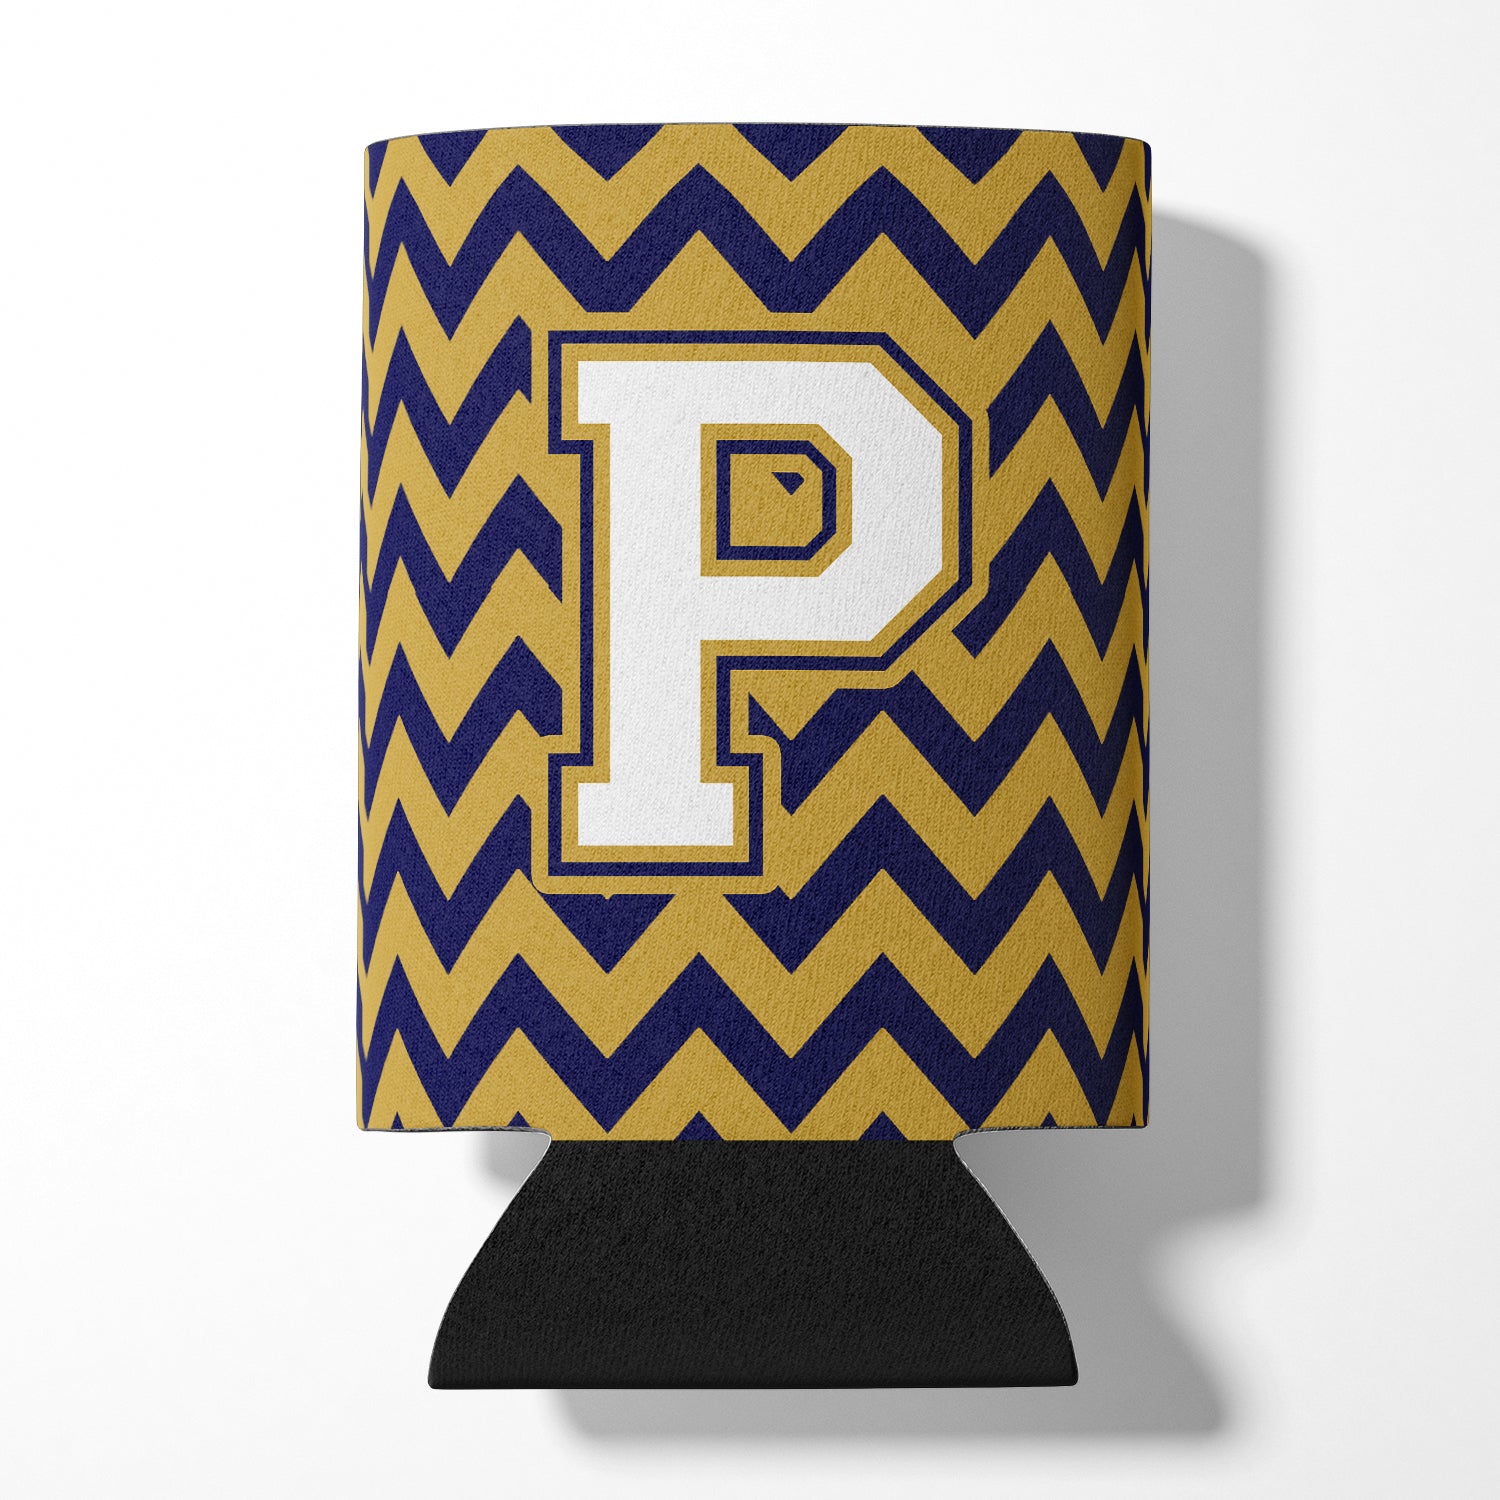 Letter P Chevron Navy Blue and Gold Can or Bottle Hugger CJ1057-PCC